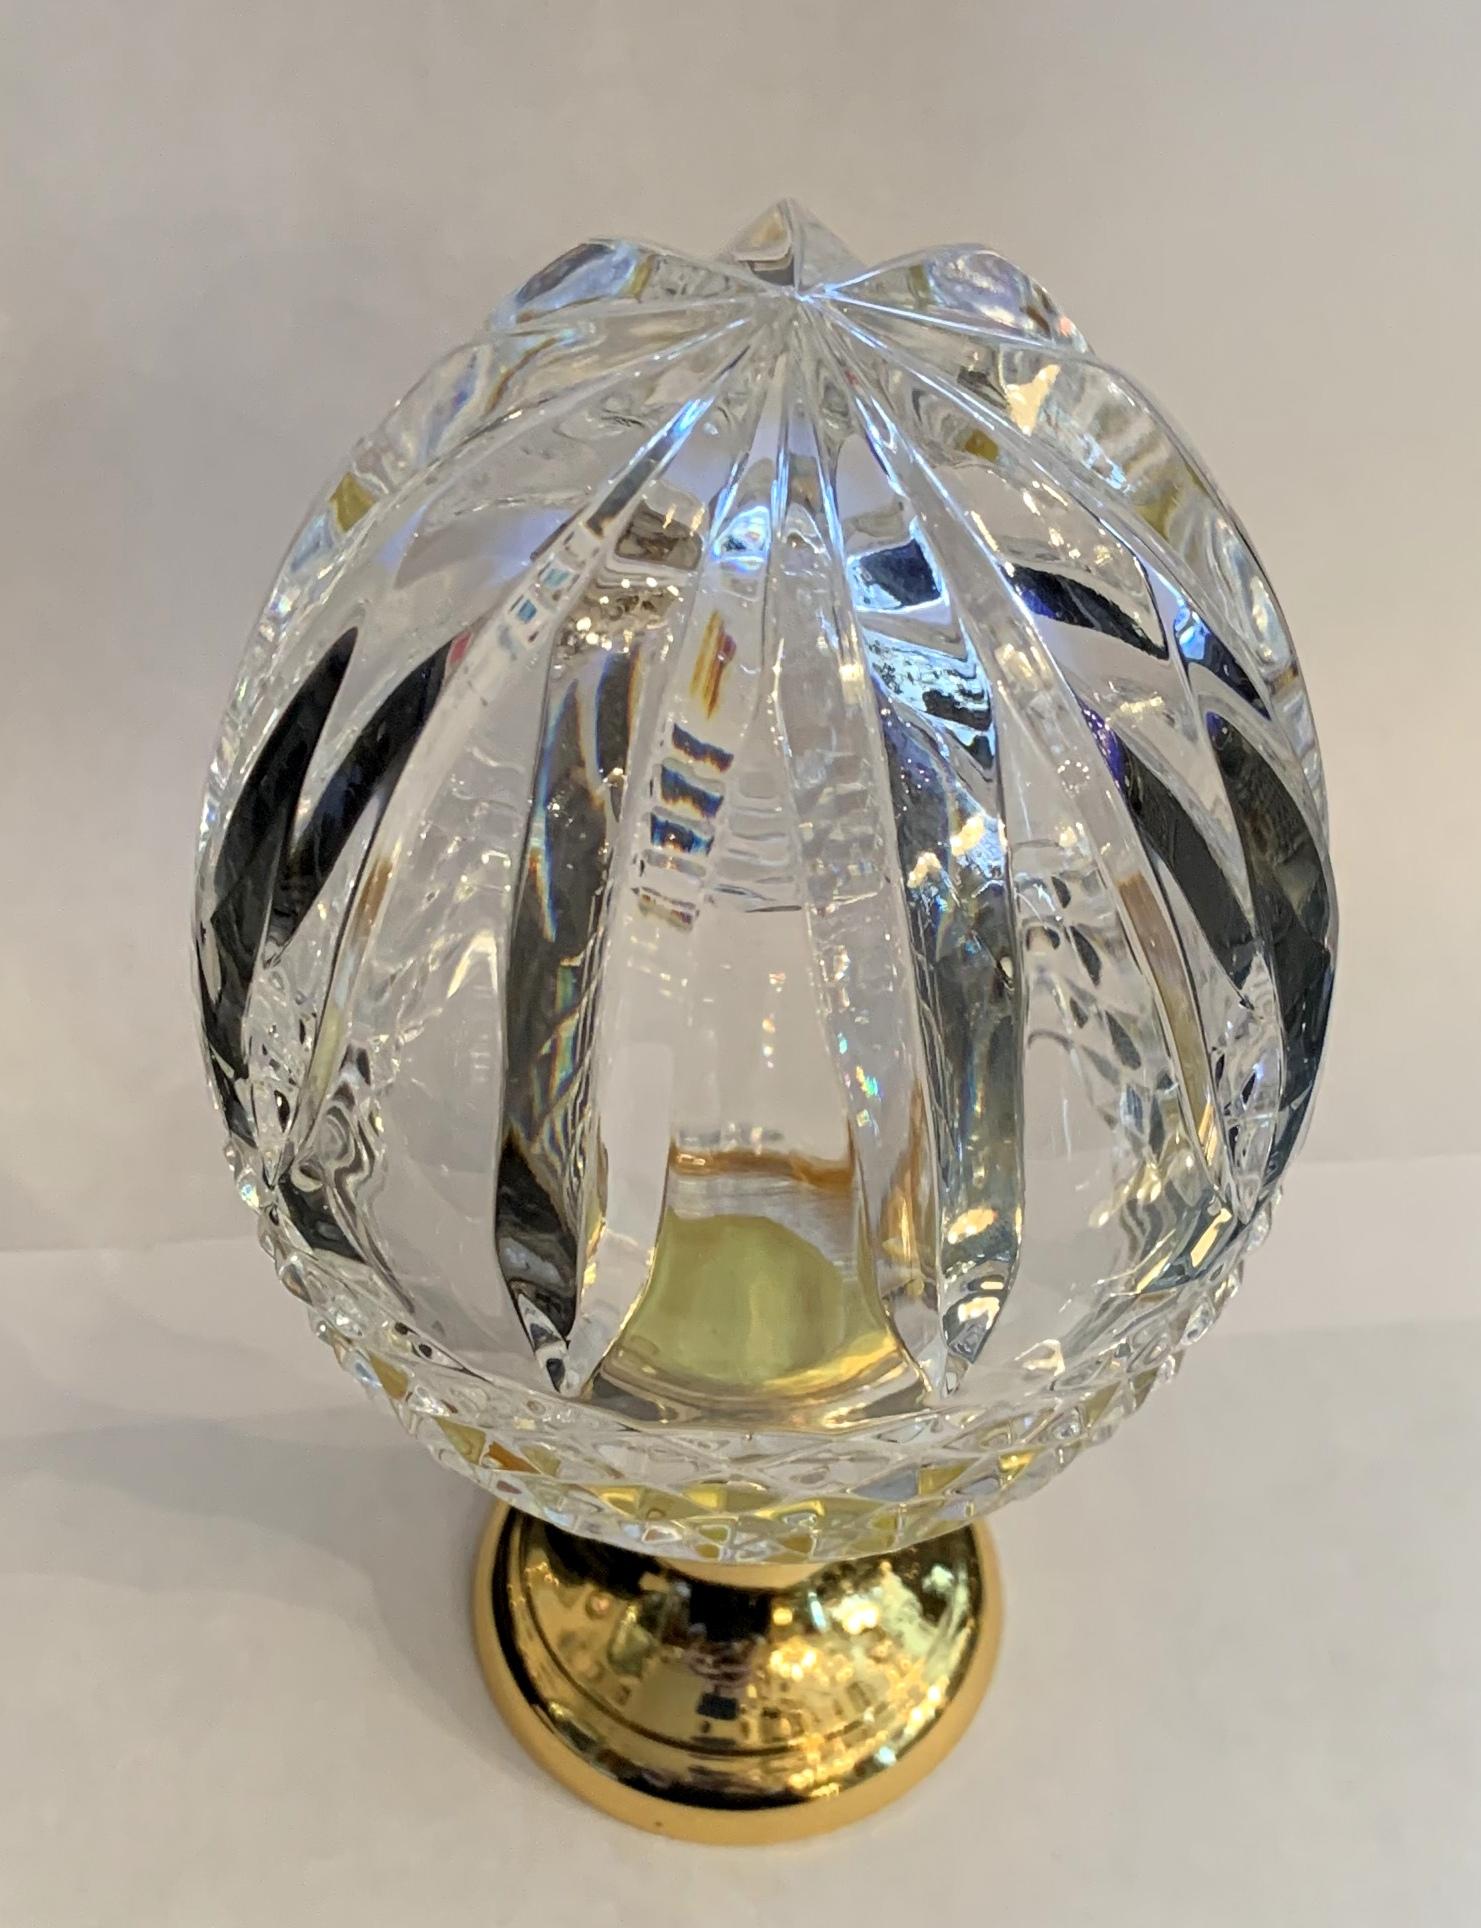 A wonderful crystal acorn cut faceted glass and brass banister newel post finial to finish off any staircase or just a beautiful decorative element piece for any room.